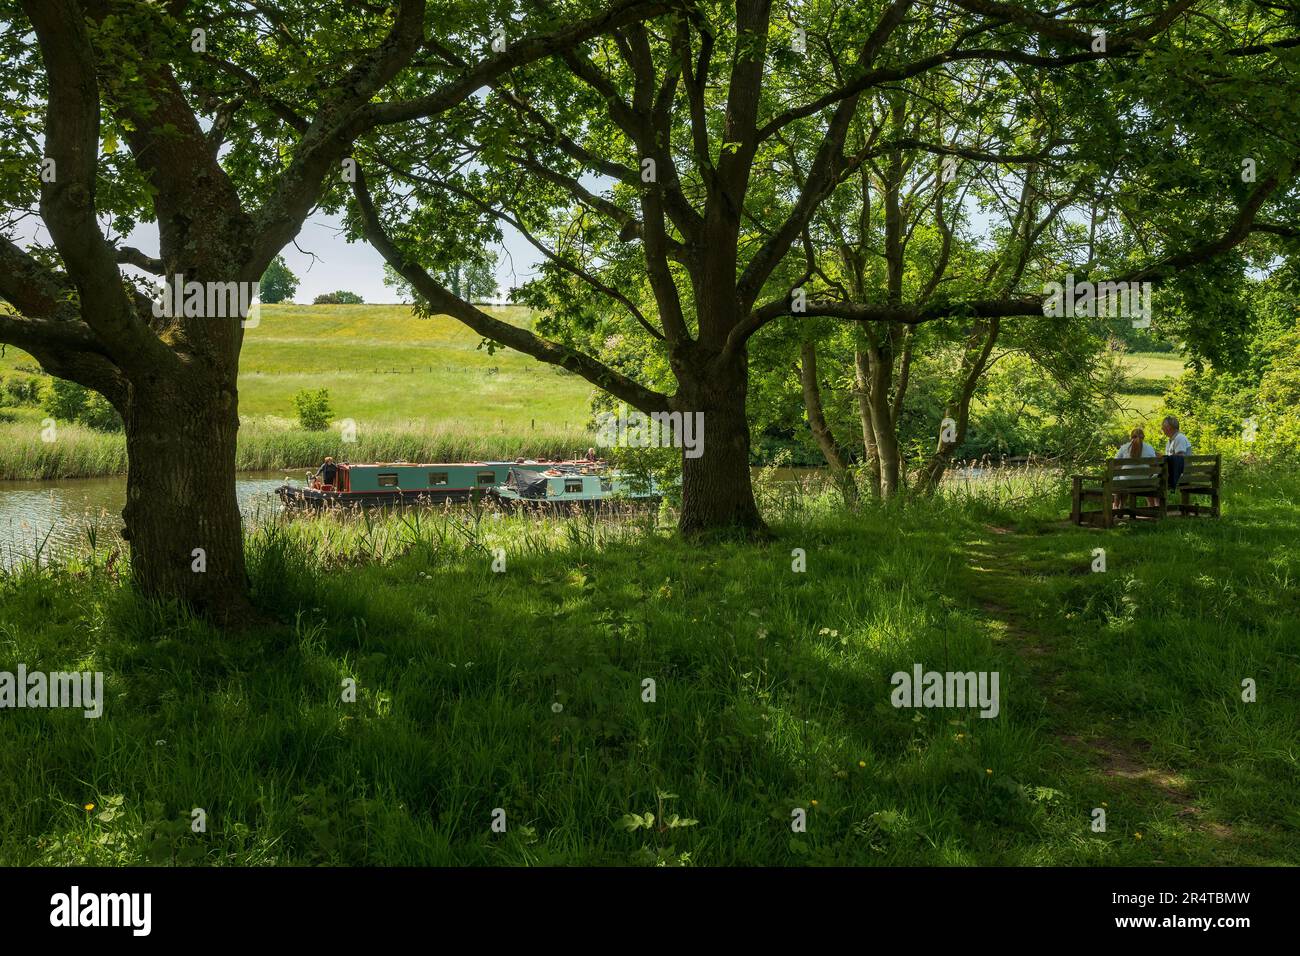 Two canal barges on the Weaver Navigstion at Dutton in Cheshire. A pastoral scene from yesteryear. Stock Photo